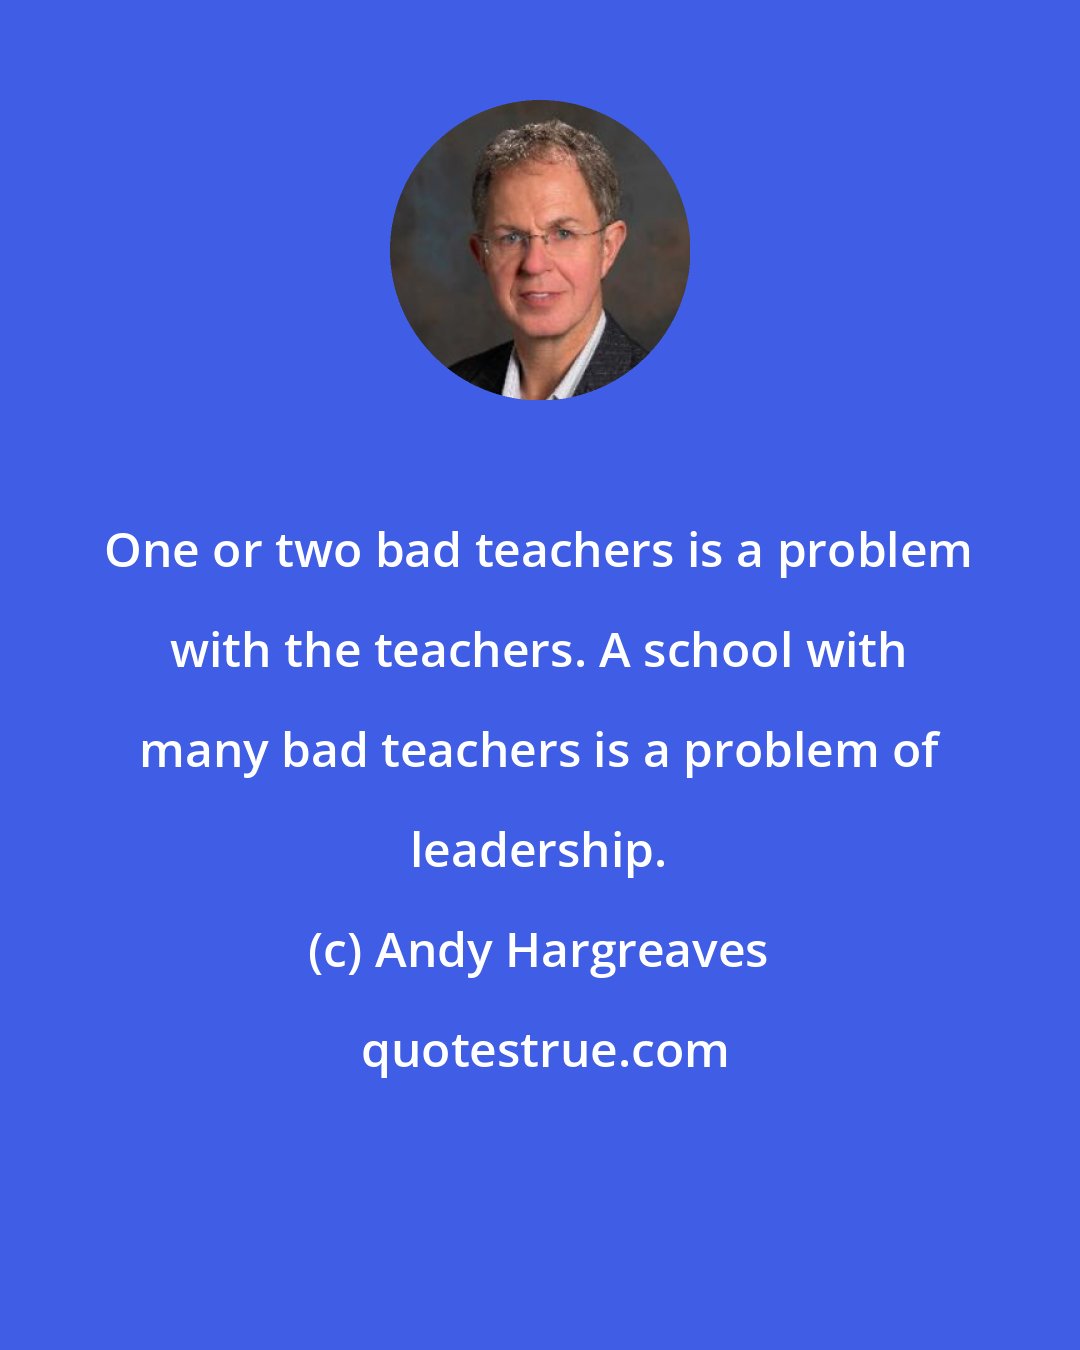 Andy Hargreaves: One or two bad teachers is a problem with the teachers. A school with many bad teachers is a problem of leadership.